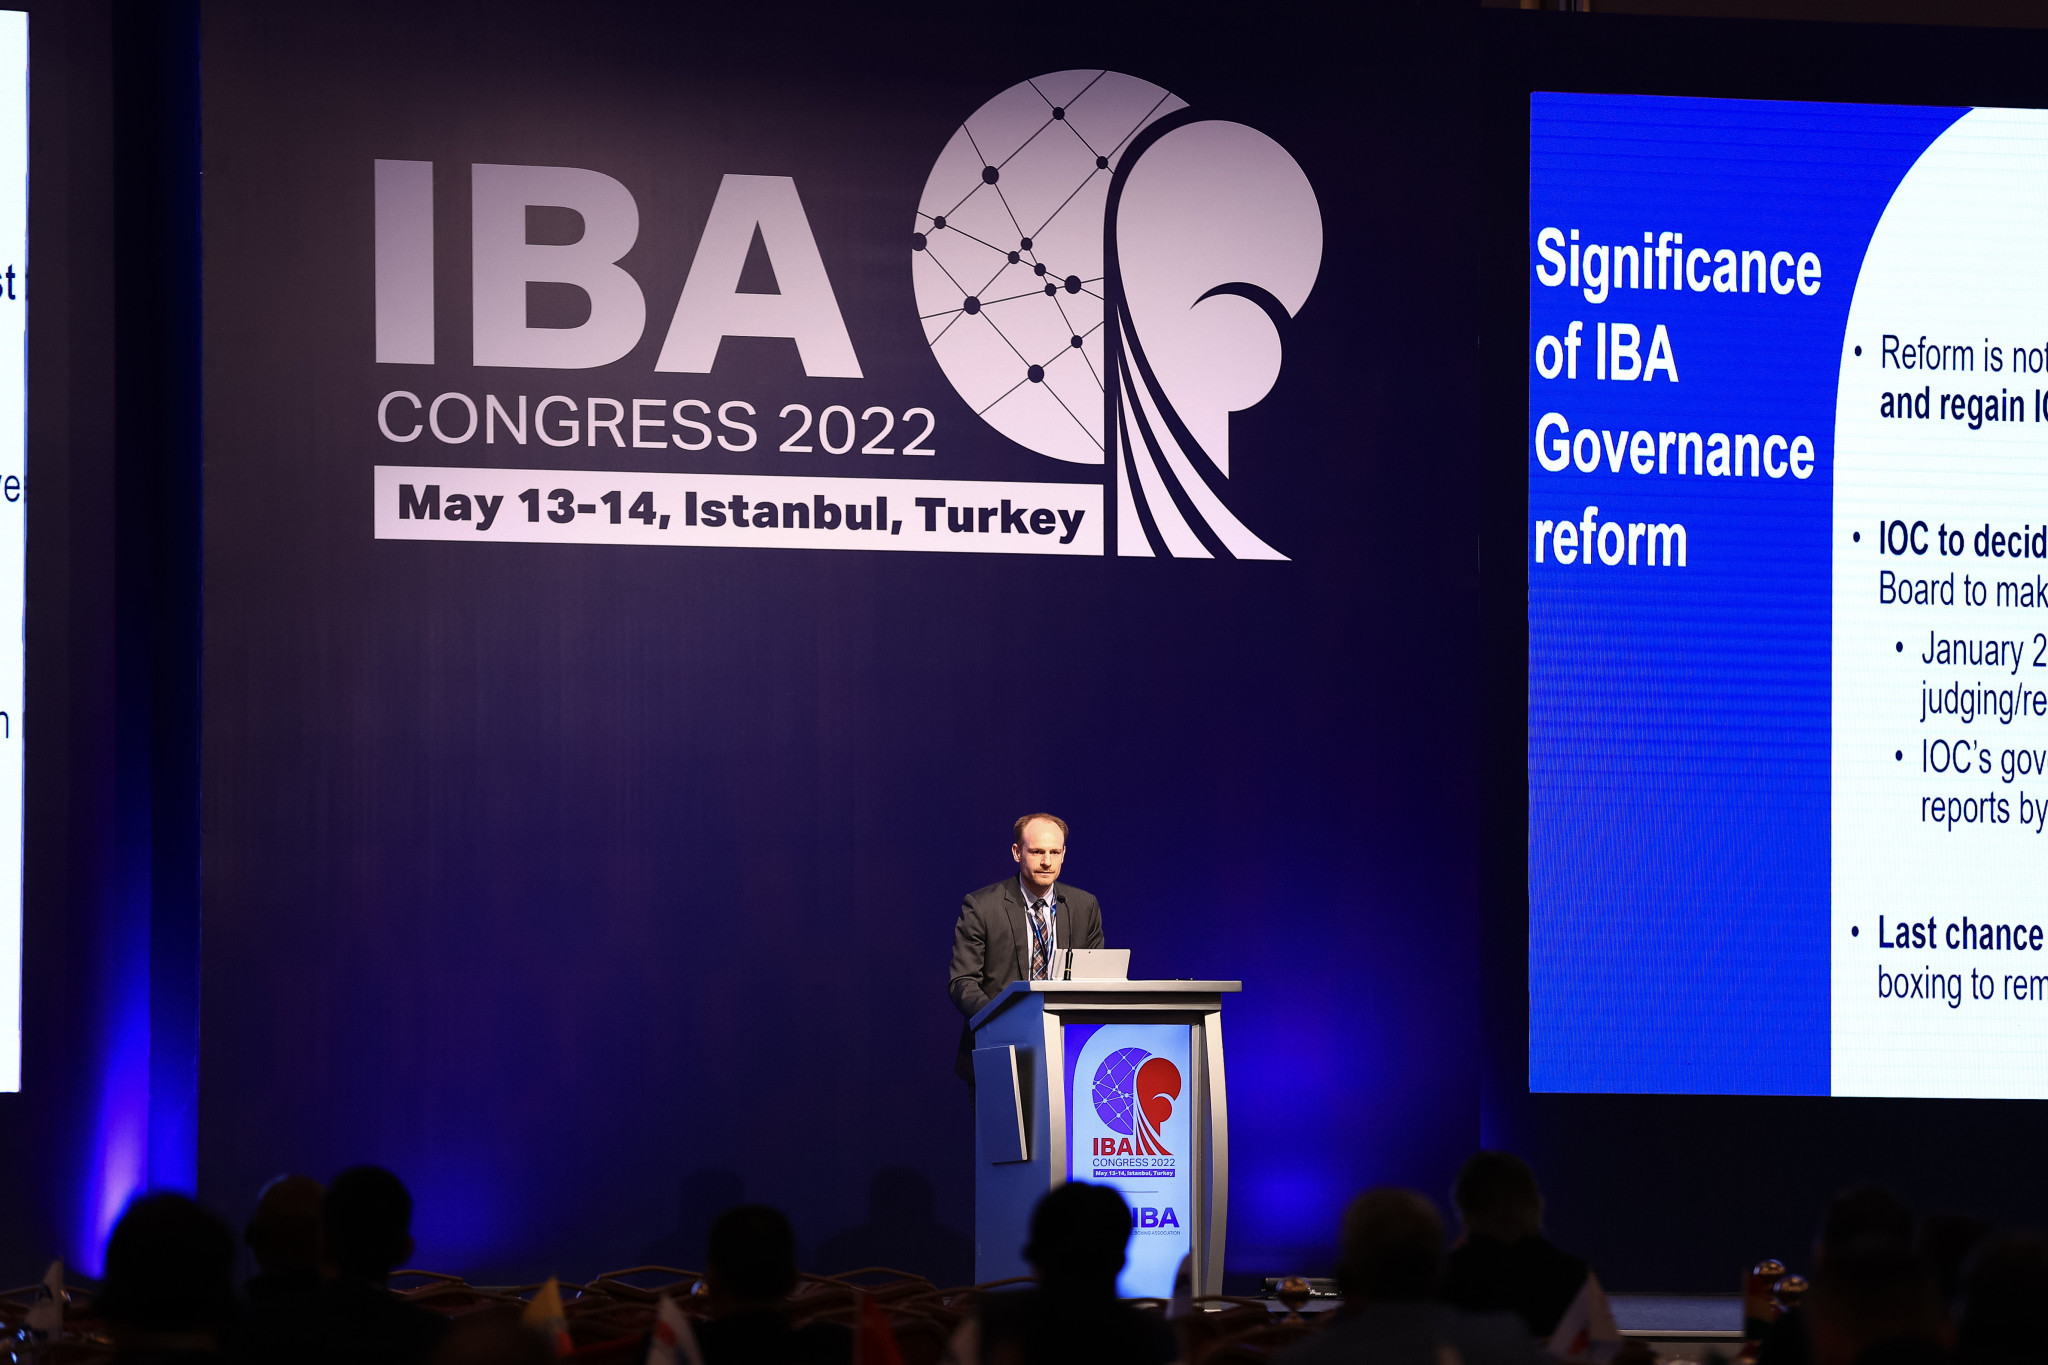 IBA's links with Russia have cost them financial expertise, says the GRG ©IBA